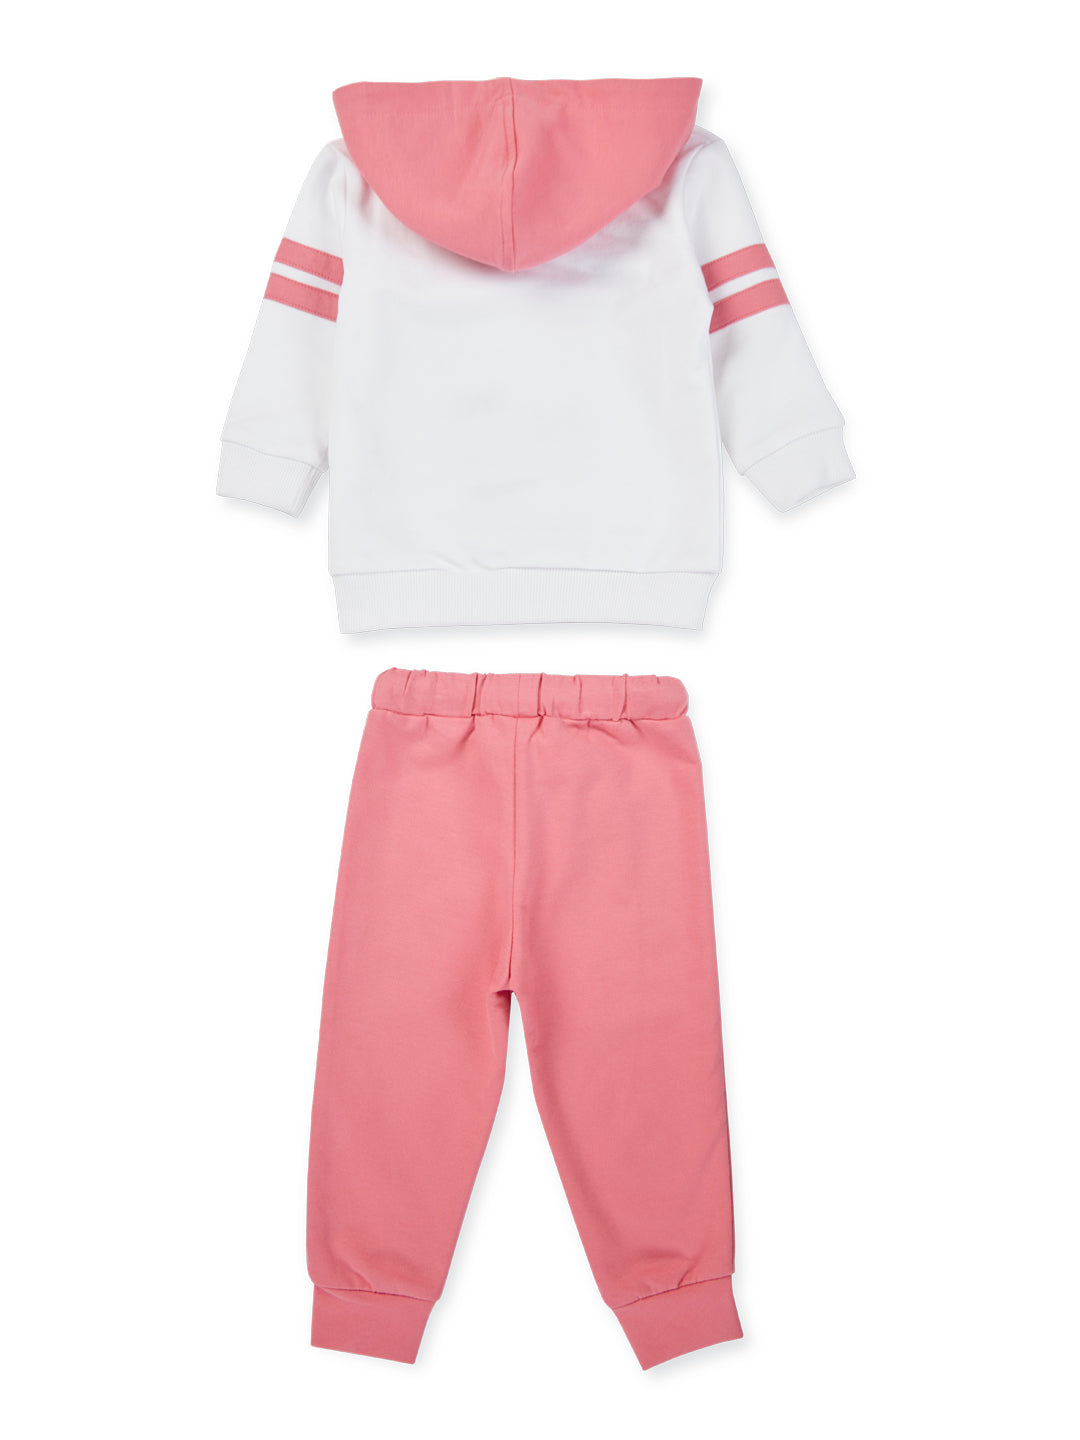 Baby Boys Set of  pink and white round neck knitted cotton t-shirt and pajamas.